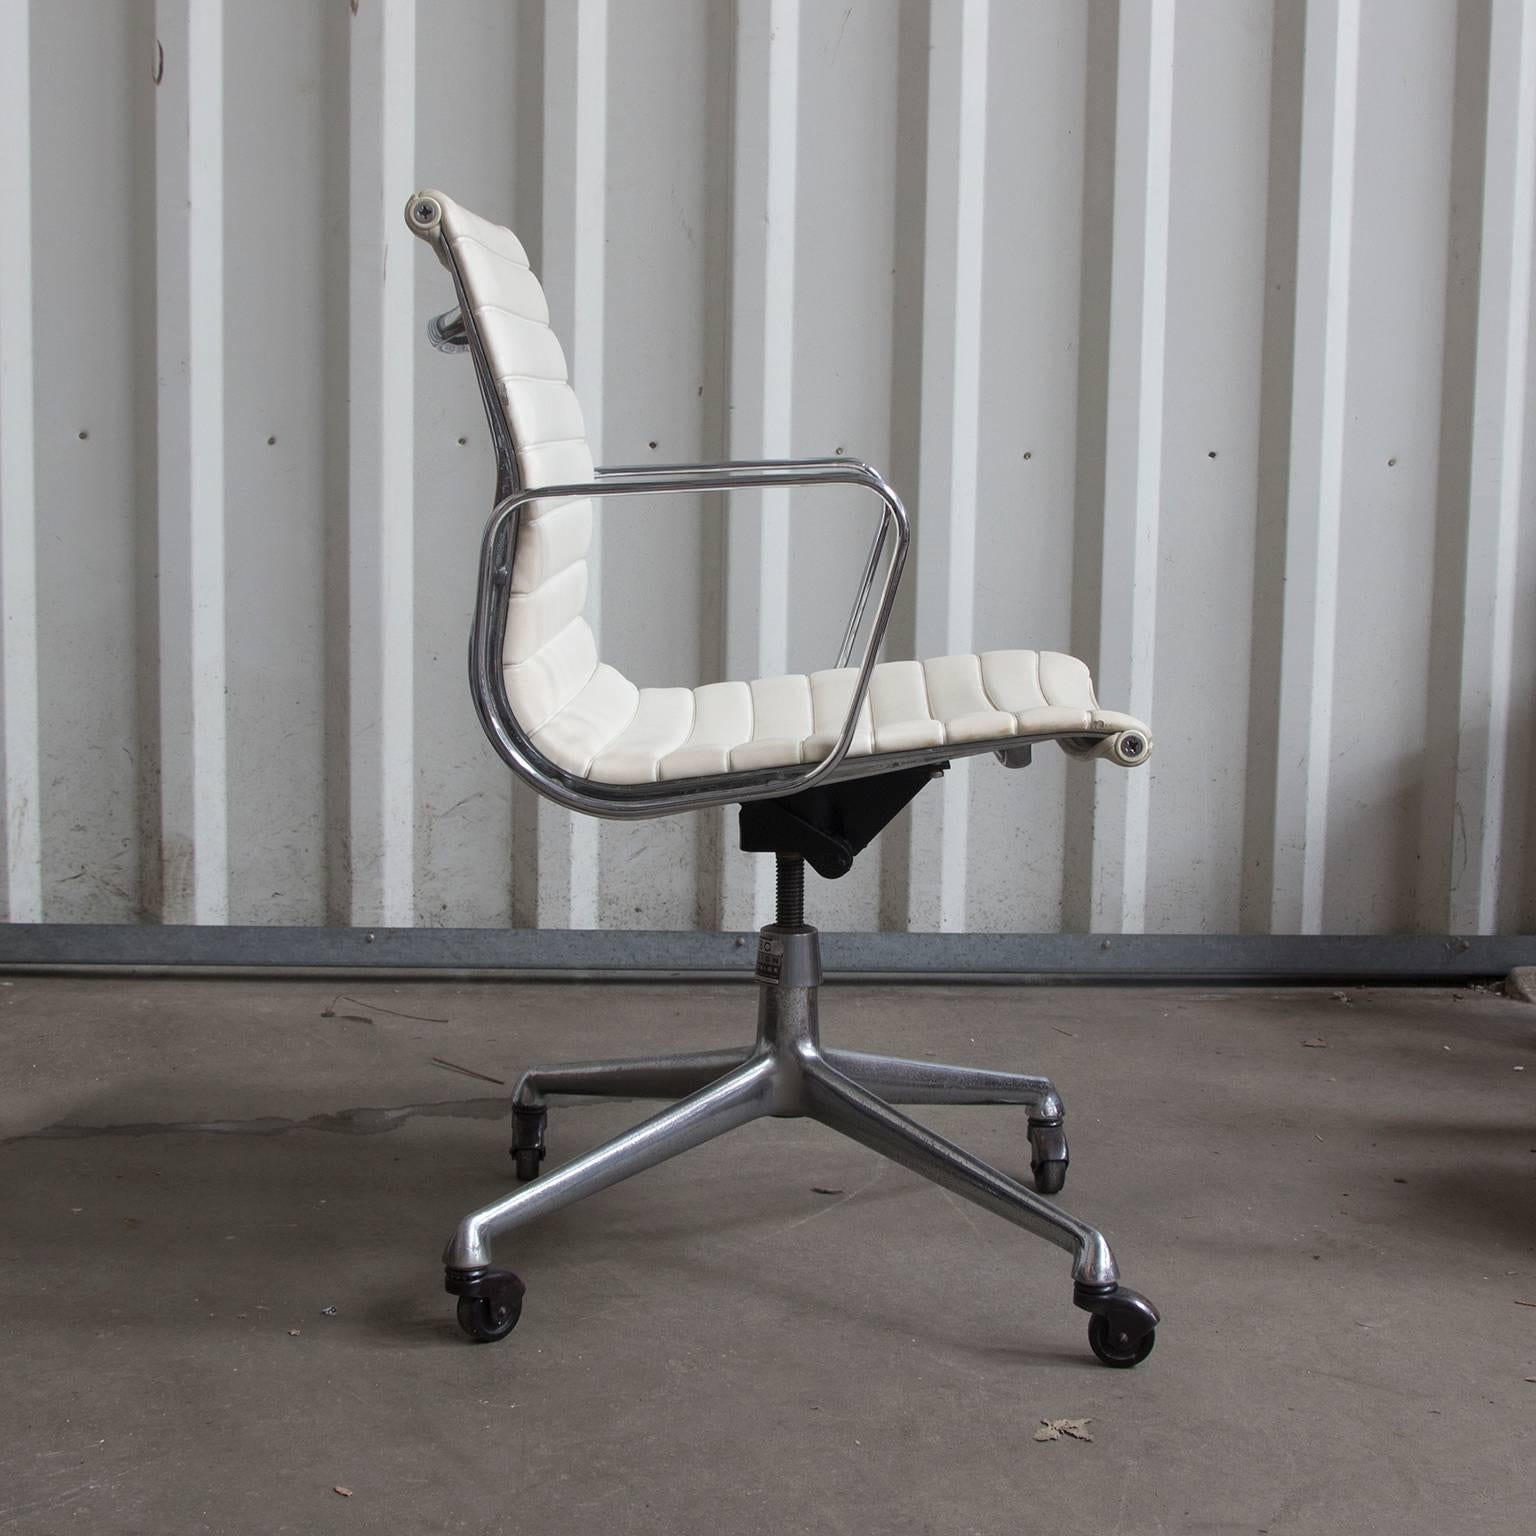 Eames in off-white or crème. The color changed some over the years from off-white to crème color. Traces of wear like spots and scratches in upholstery and some damage (see picture 6, 7, and 8). Also some traces of wear on the base. The chair has